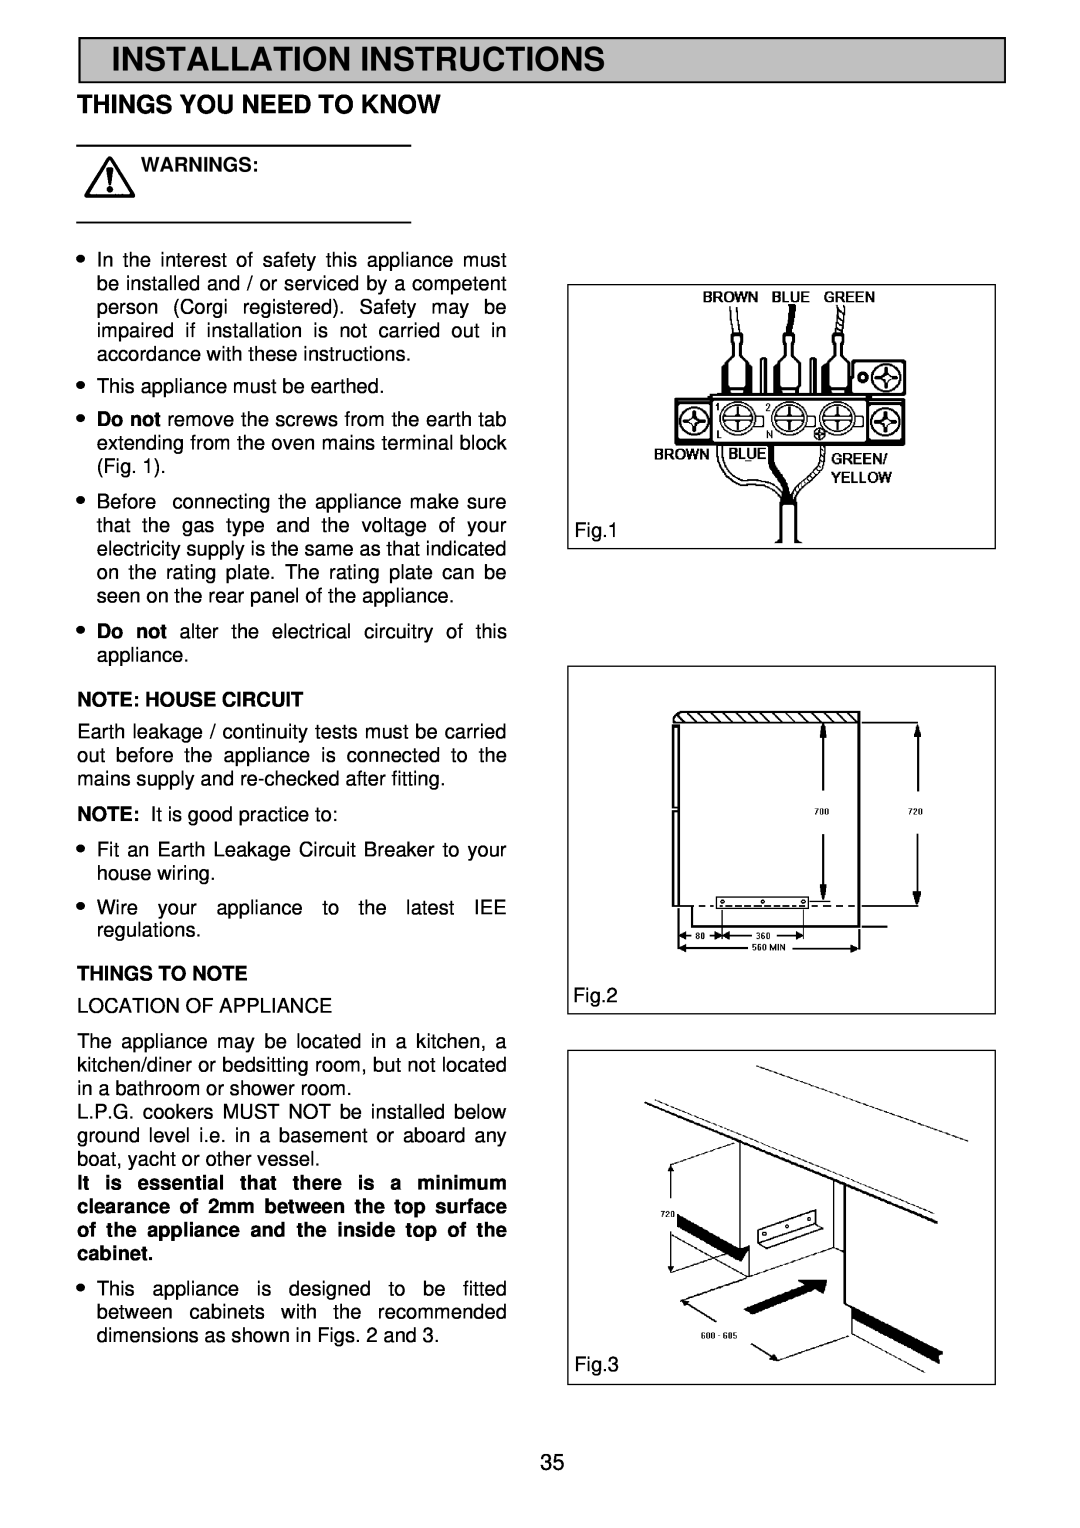 Electrolux EDB 872 manual Installation Instructions, Things You Need To Know, Warnings, Note House Circuit, Things To Note 